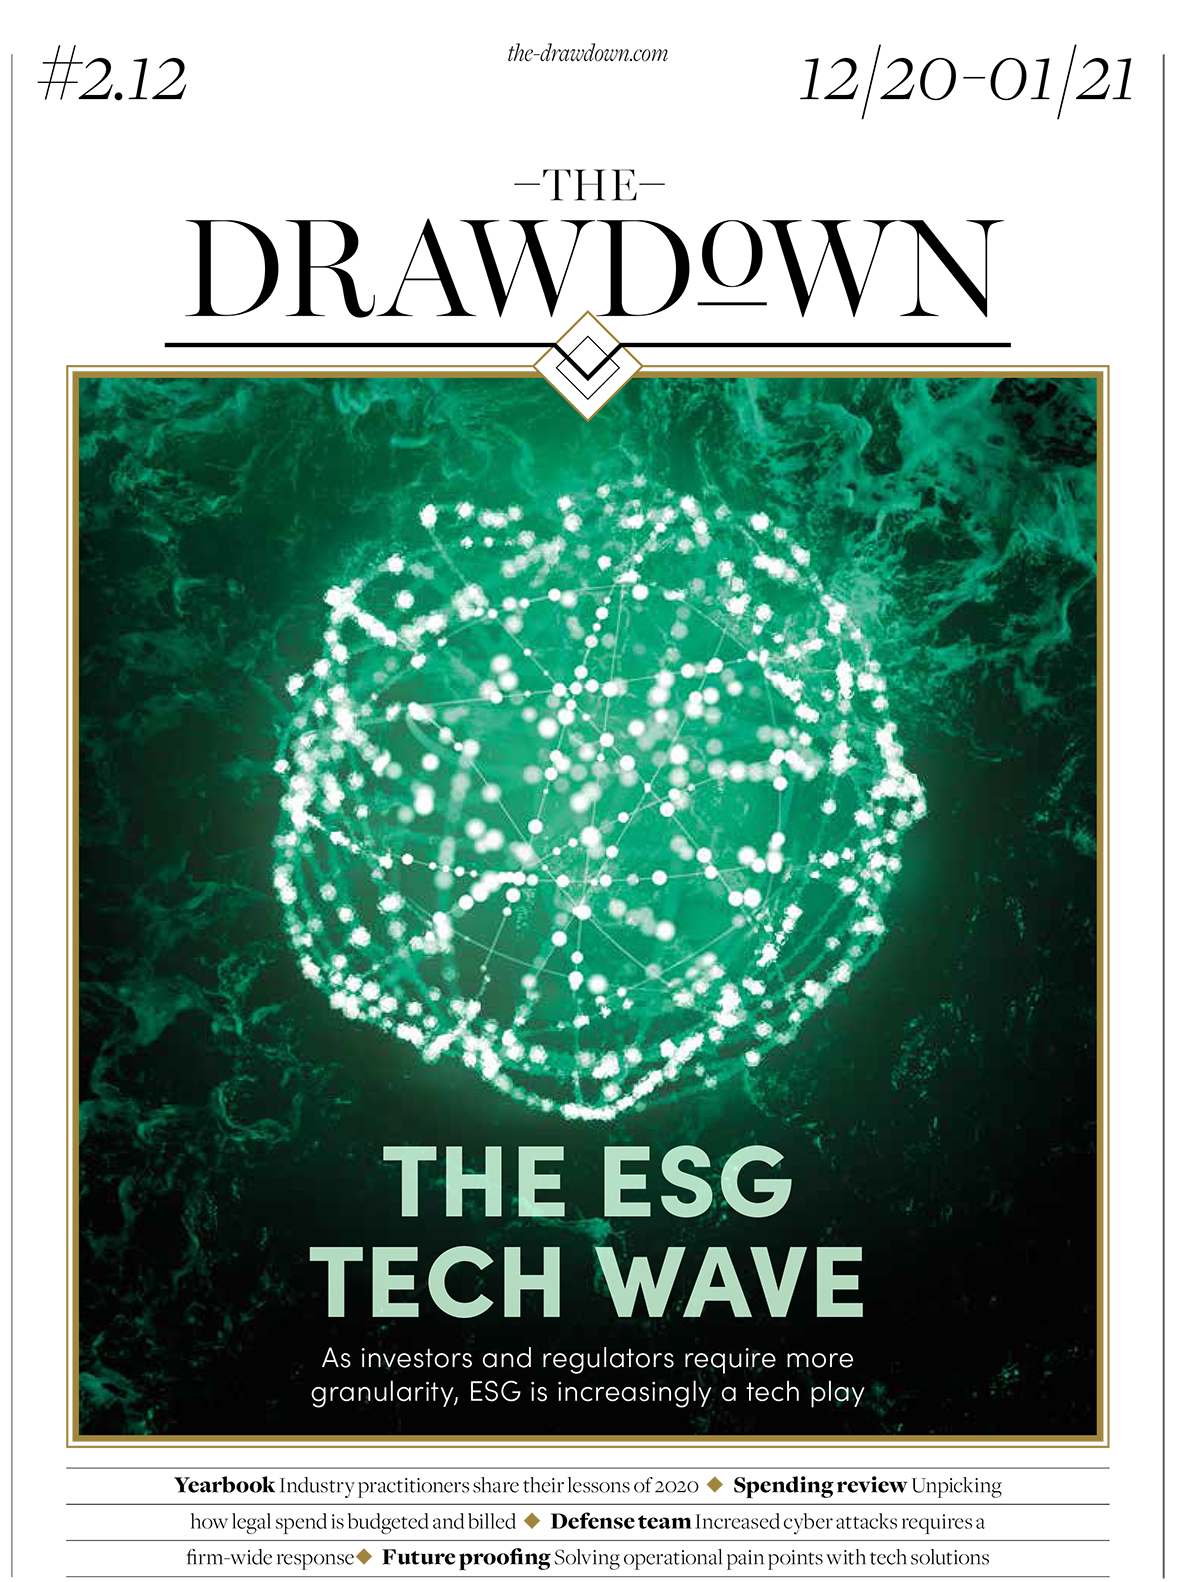 The Drawdown Issue December 2020 / January 2021 Cover